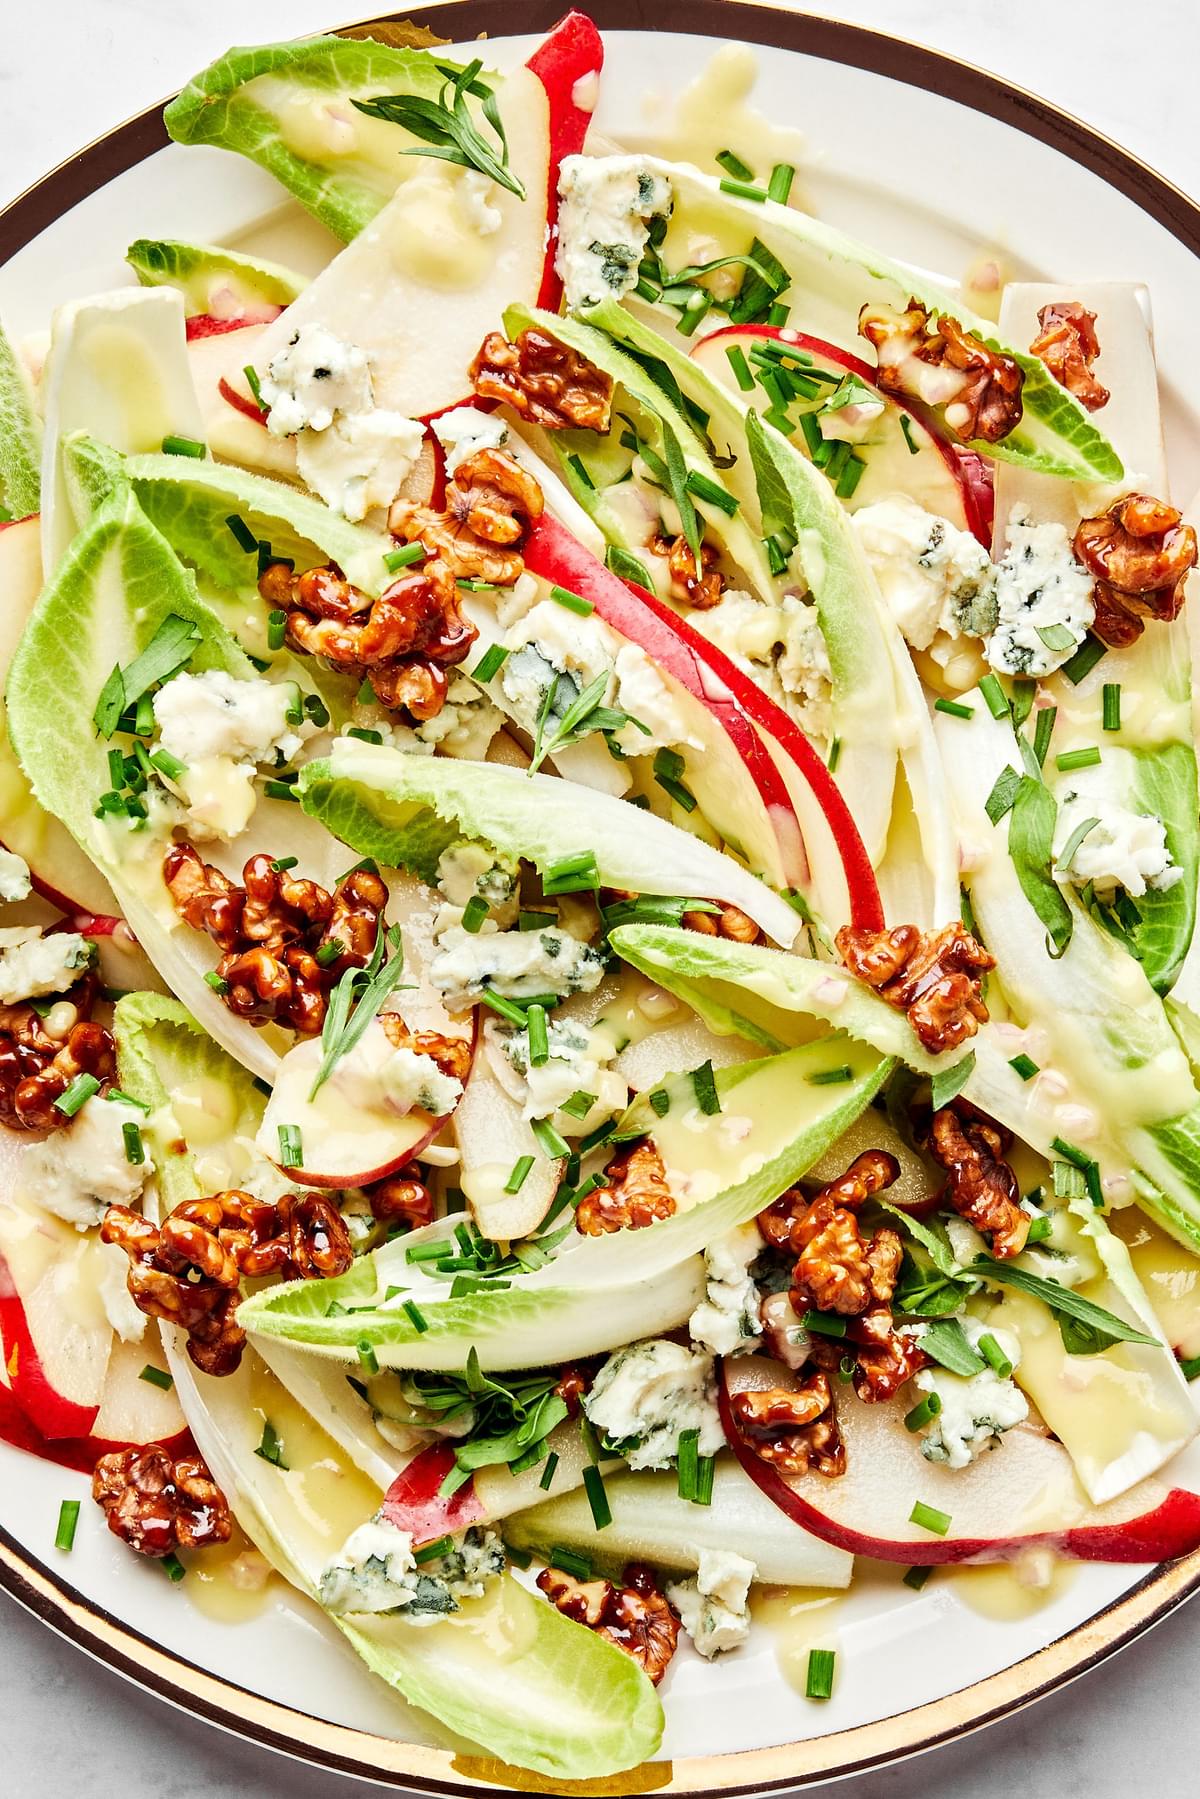 An Endive salad topped with pears, Roquefort, fresh chives, candied walnuts and drizzled with homemade pear vinaigrette